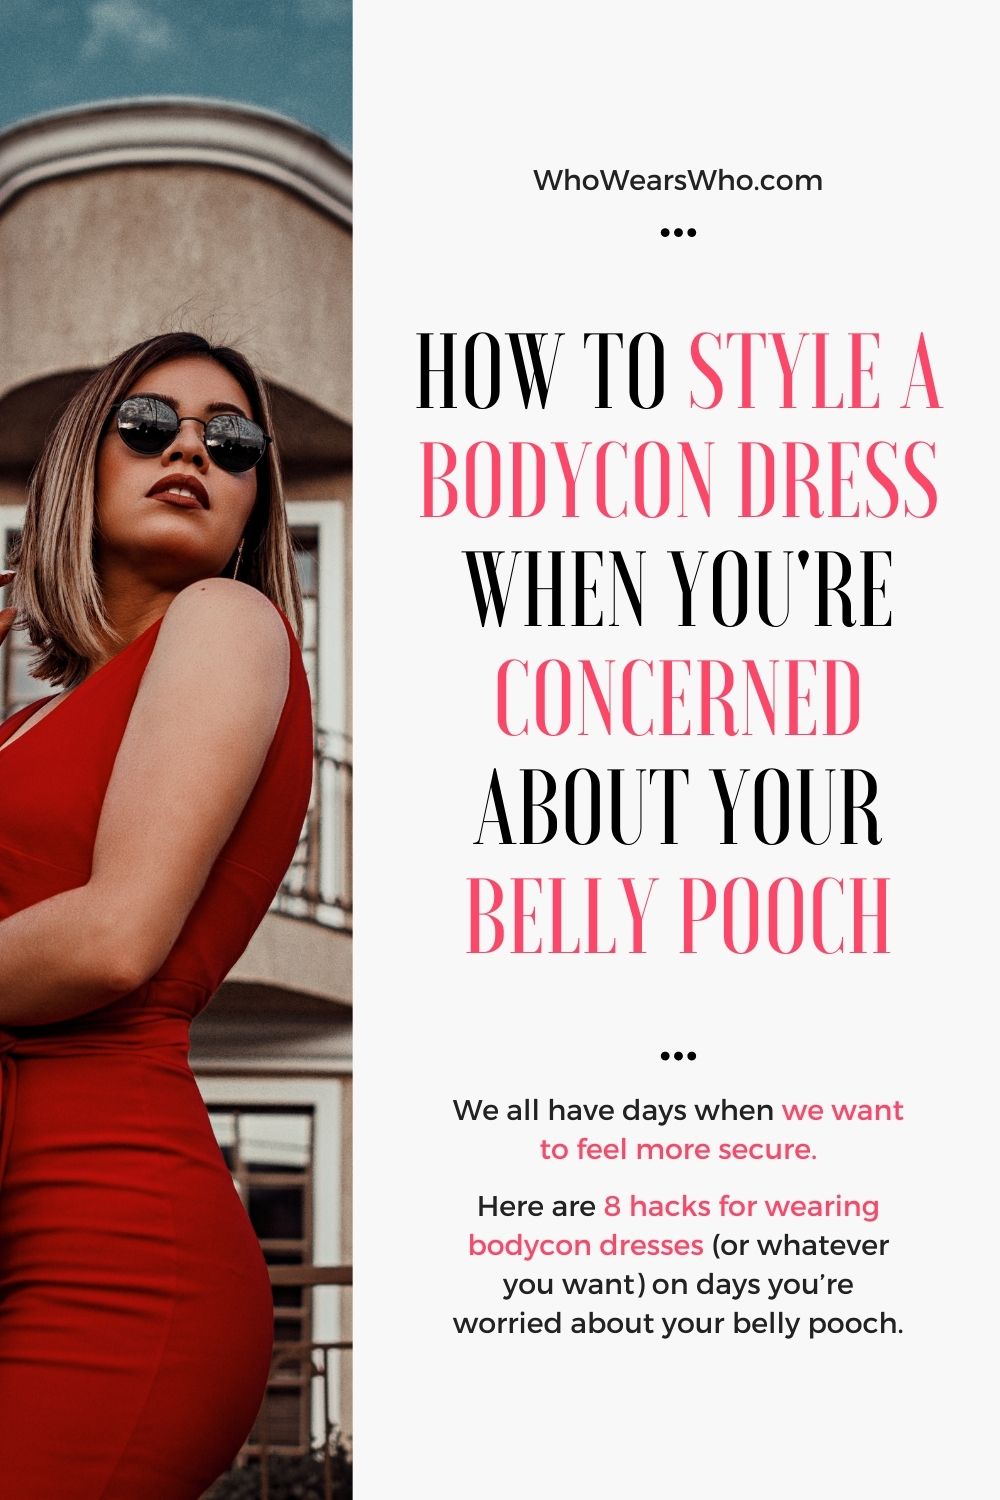 How to style a bodycon dress 1